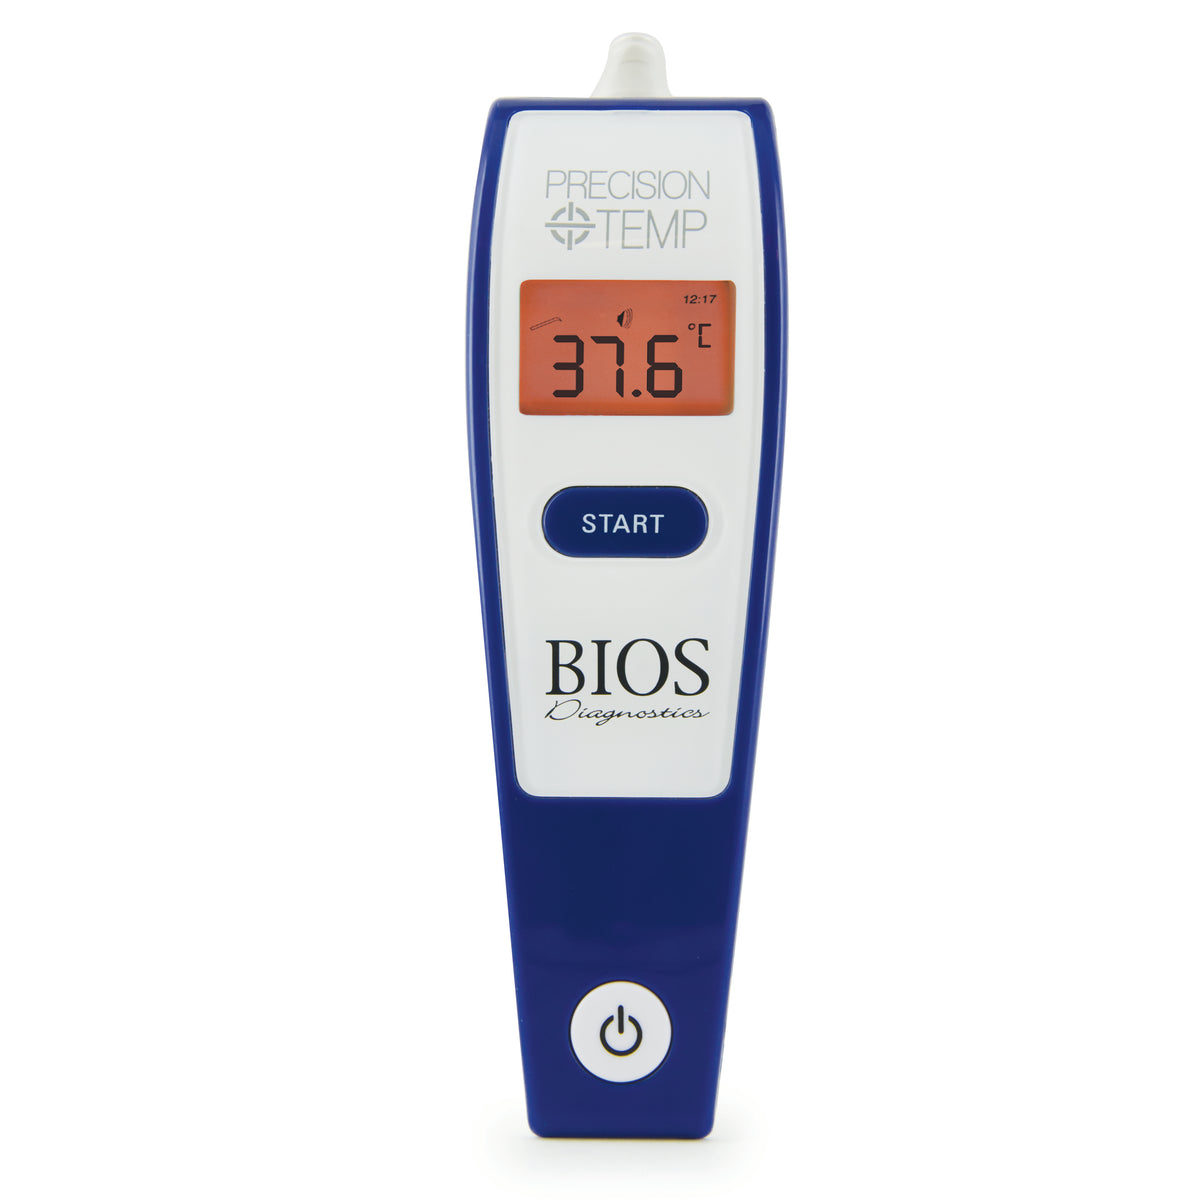 Precision Temp Instant Ear thermometer with Bluetooth – Bios Medical